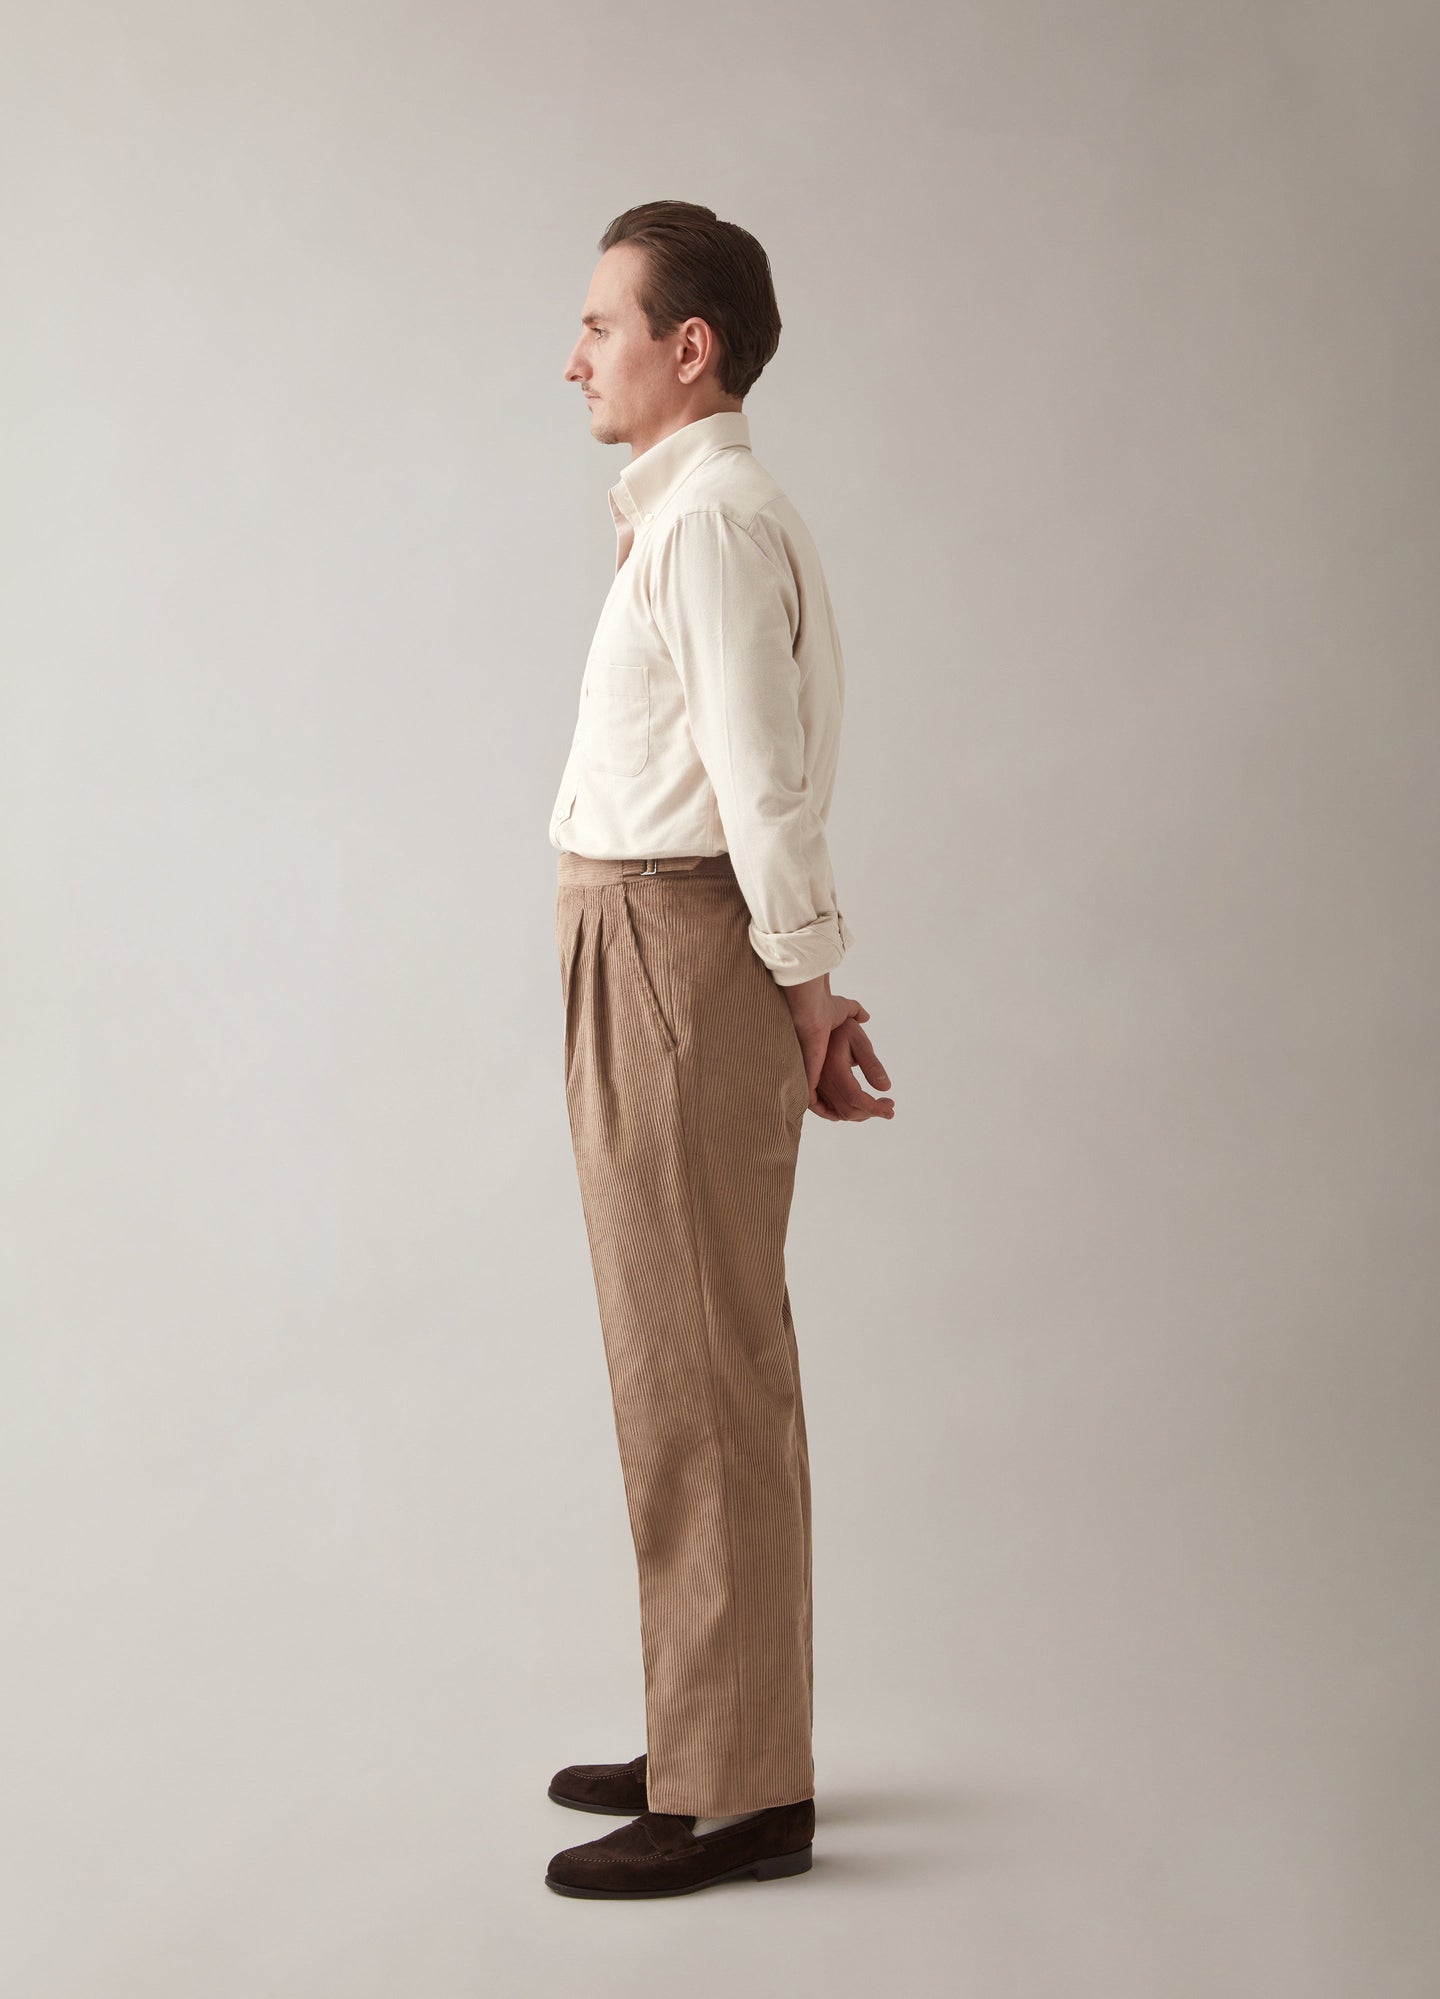 Where to find the perfect corduroy trousers - The Field